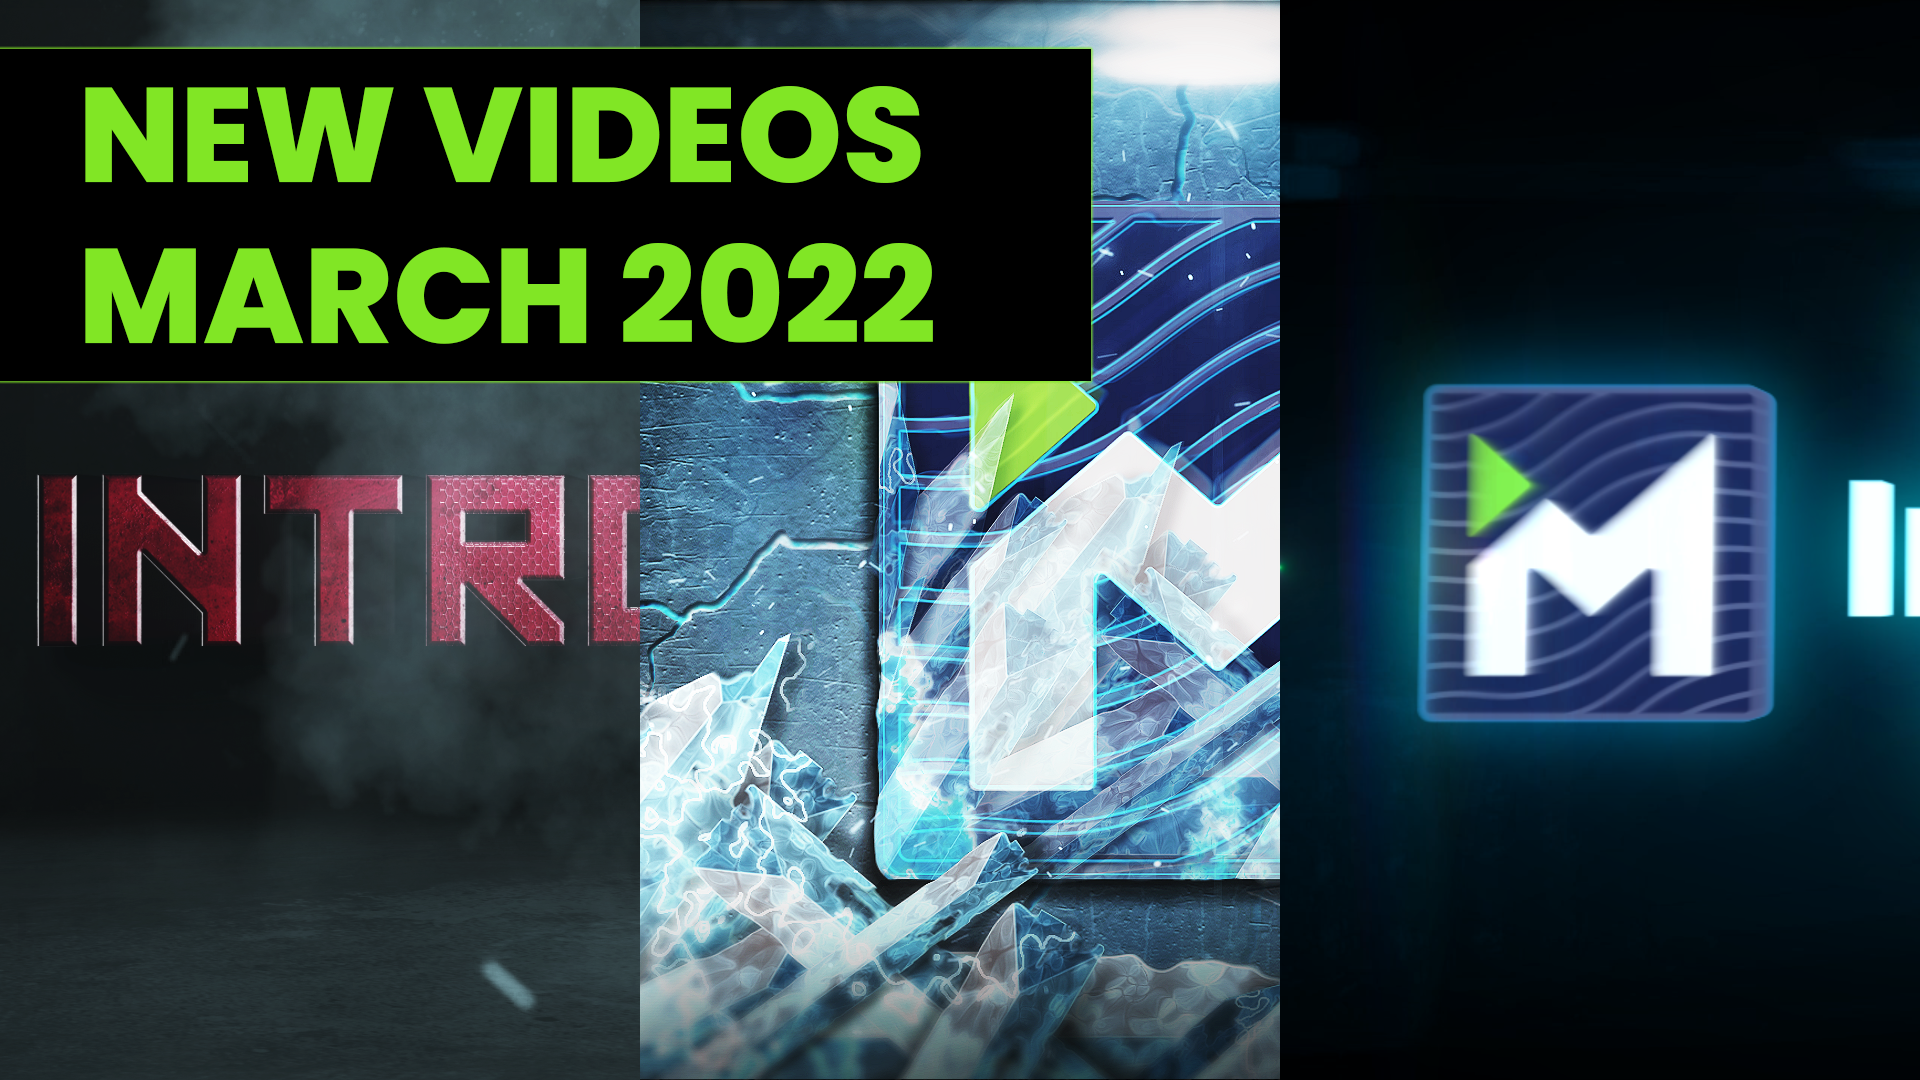 Customizable Text and 11 New Videos for March 2022